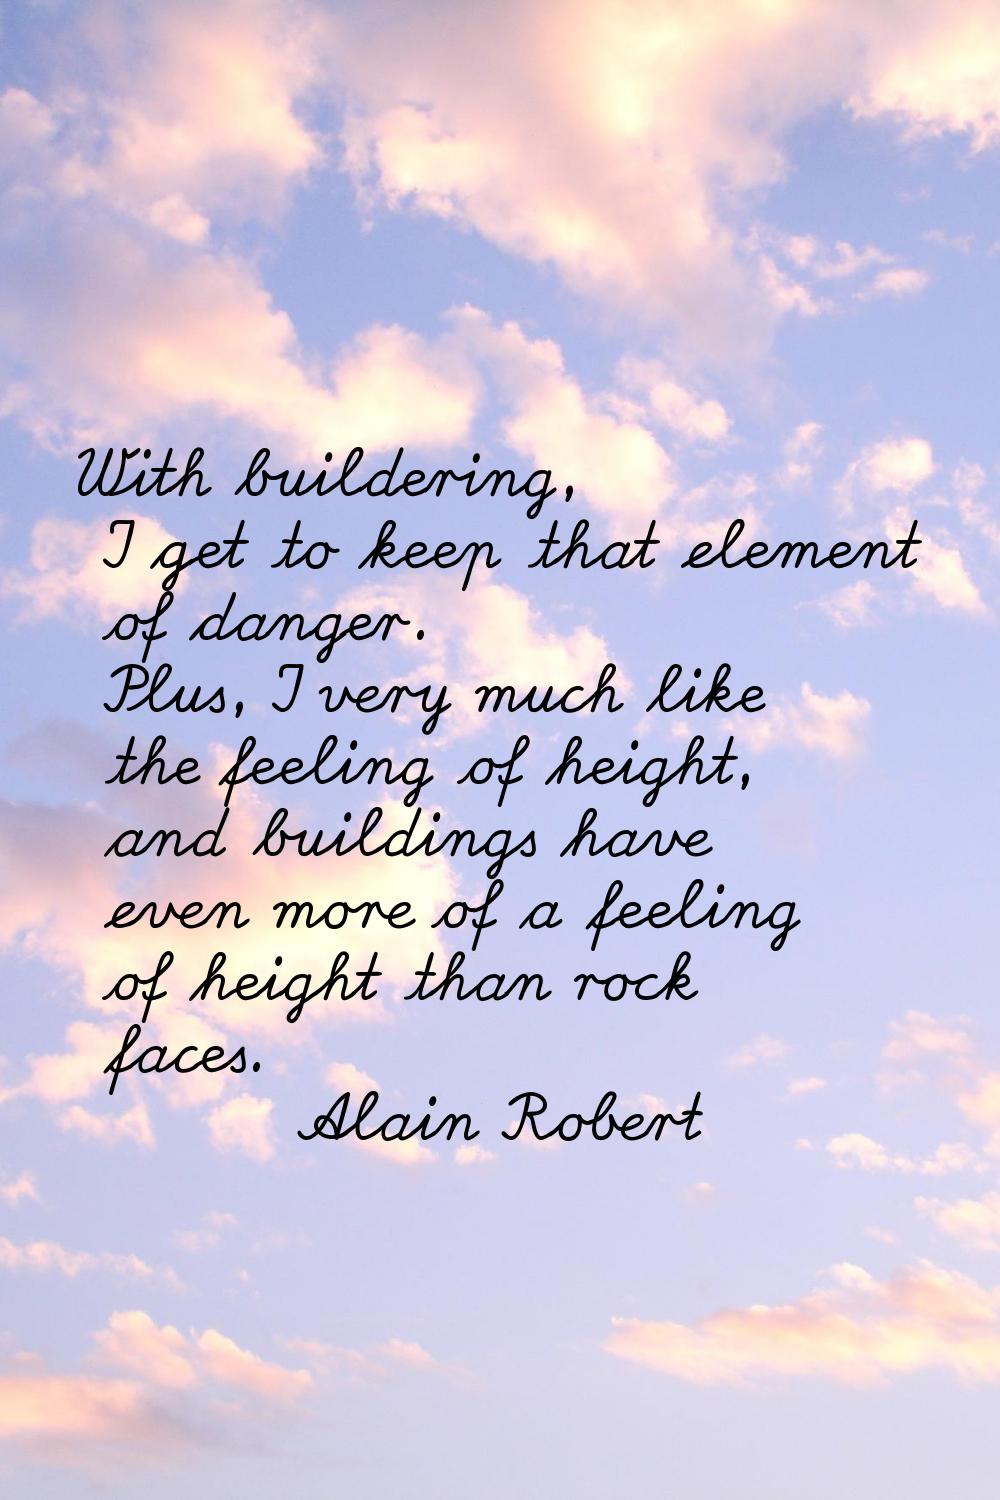 With buildering, I get to keep that element of danger. Plus, I very much like the feeling of height